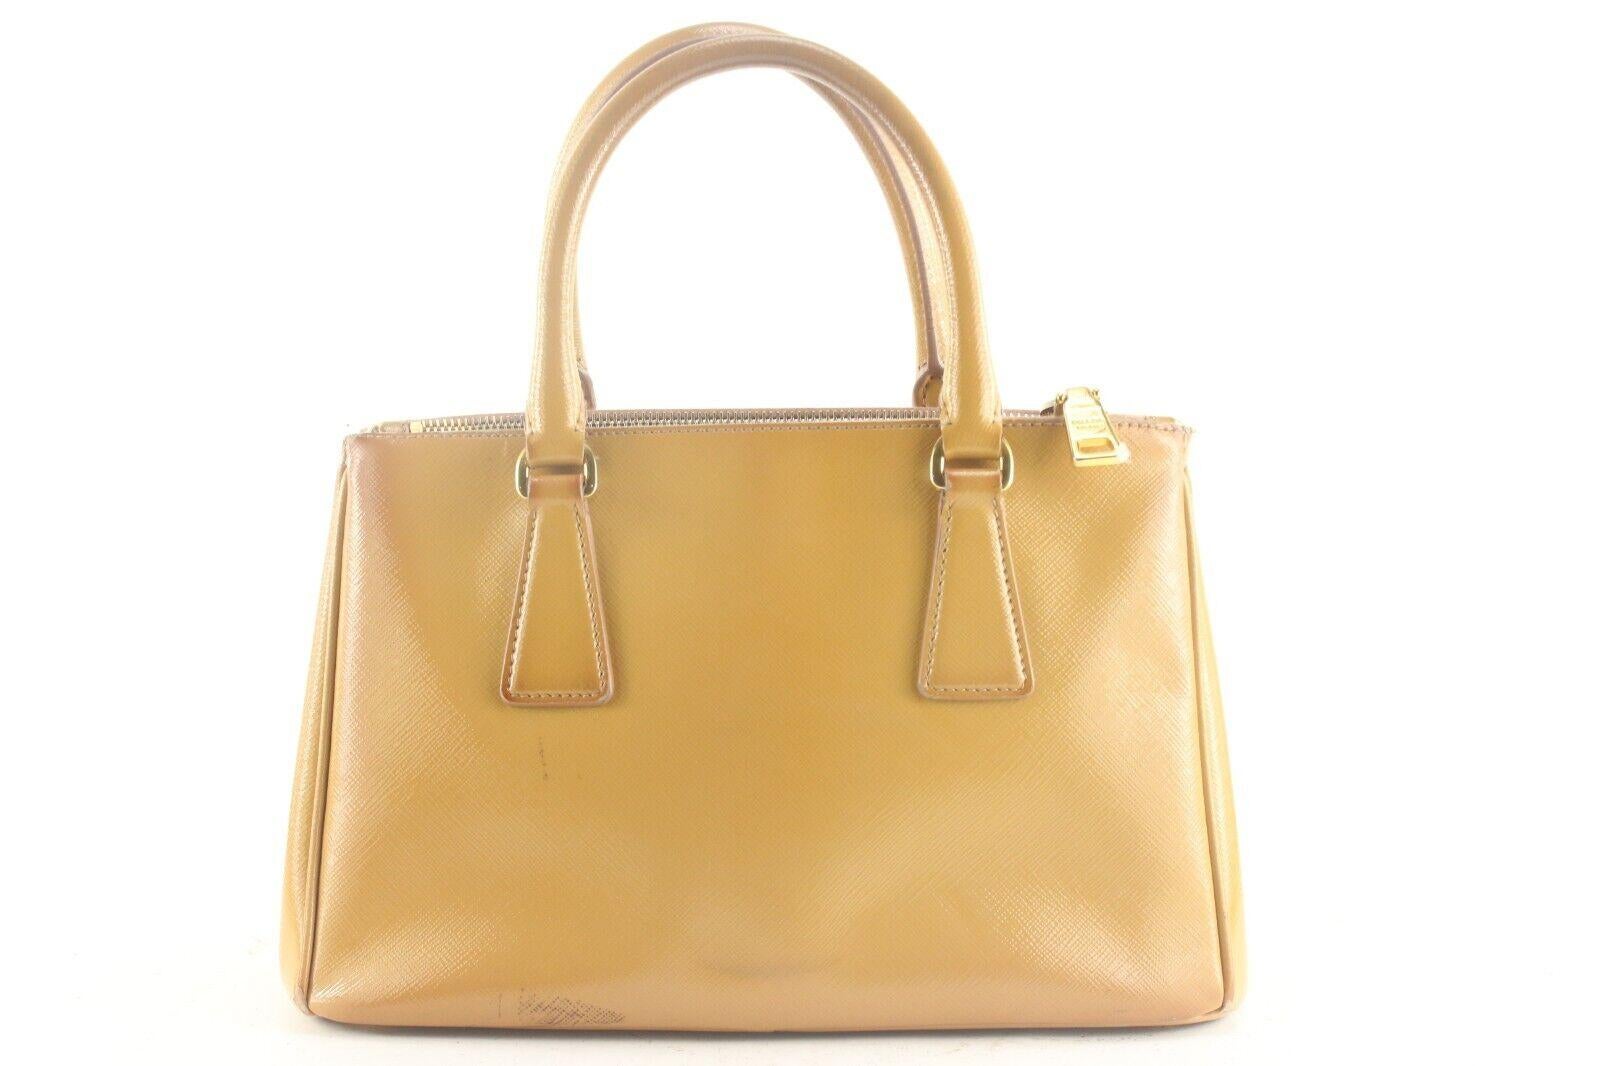 Prada Tan Brown Saffiano Leather Luxe Tote 2way with Strap 3PR831K For Sale 2